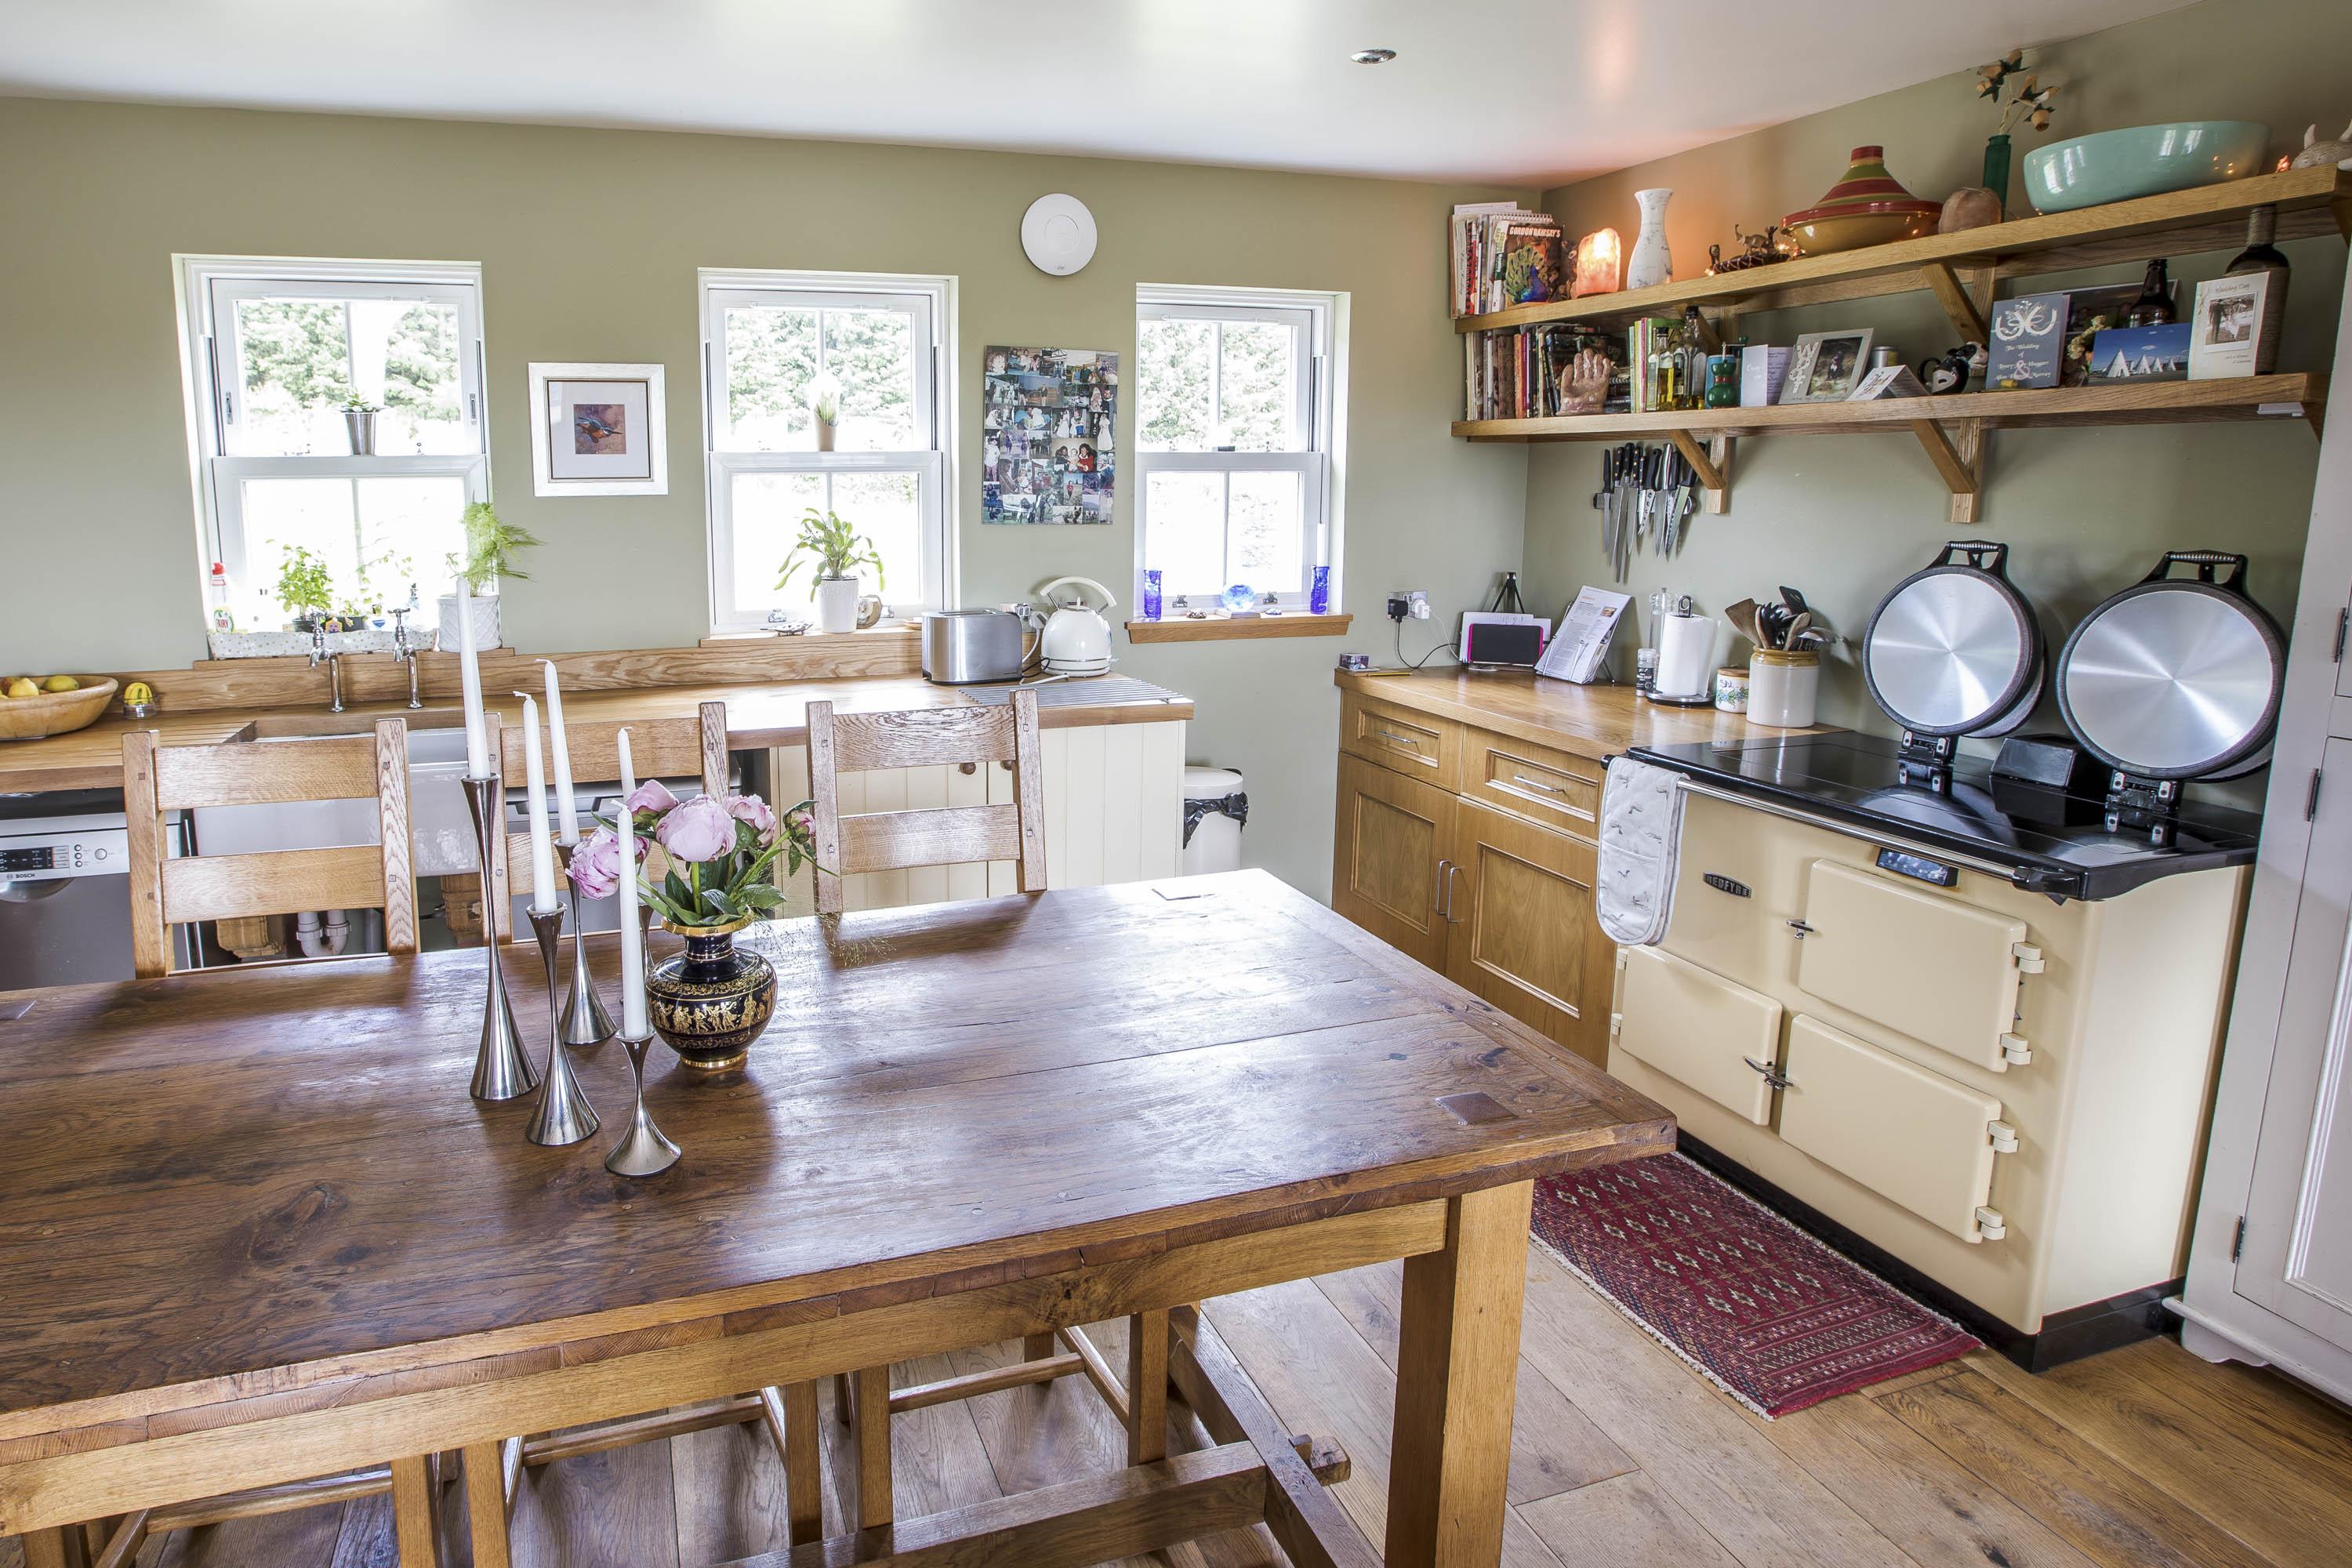 Interior of country kitchen with Aga, one of the projects of Harry Taylor & Co, Perth.